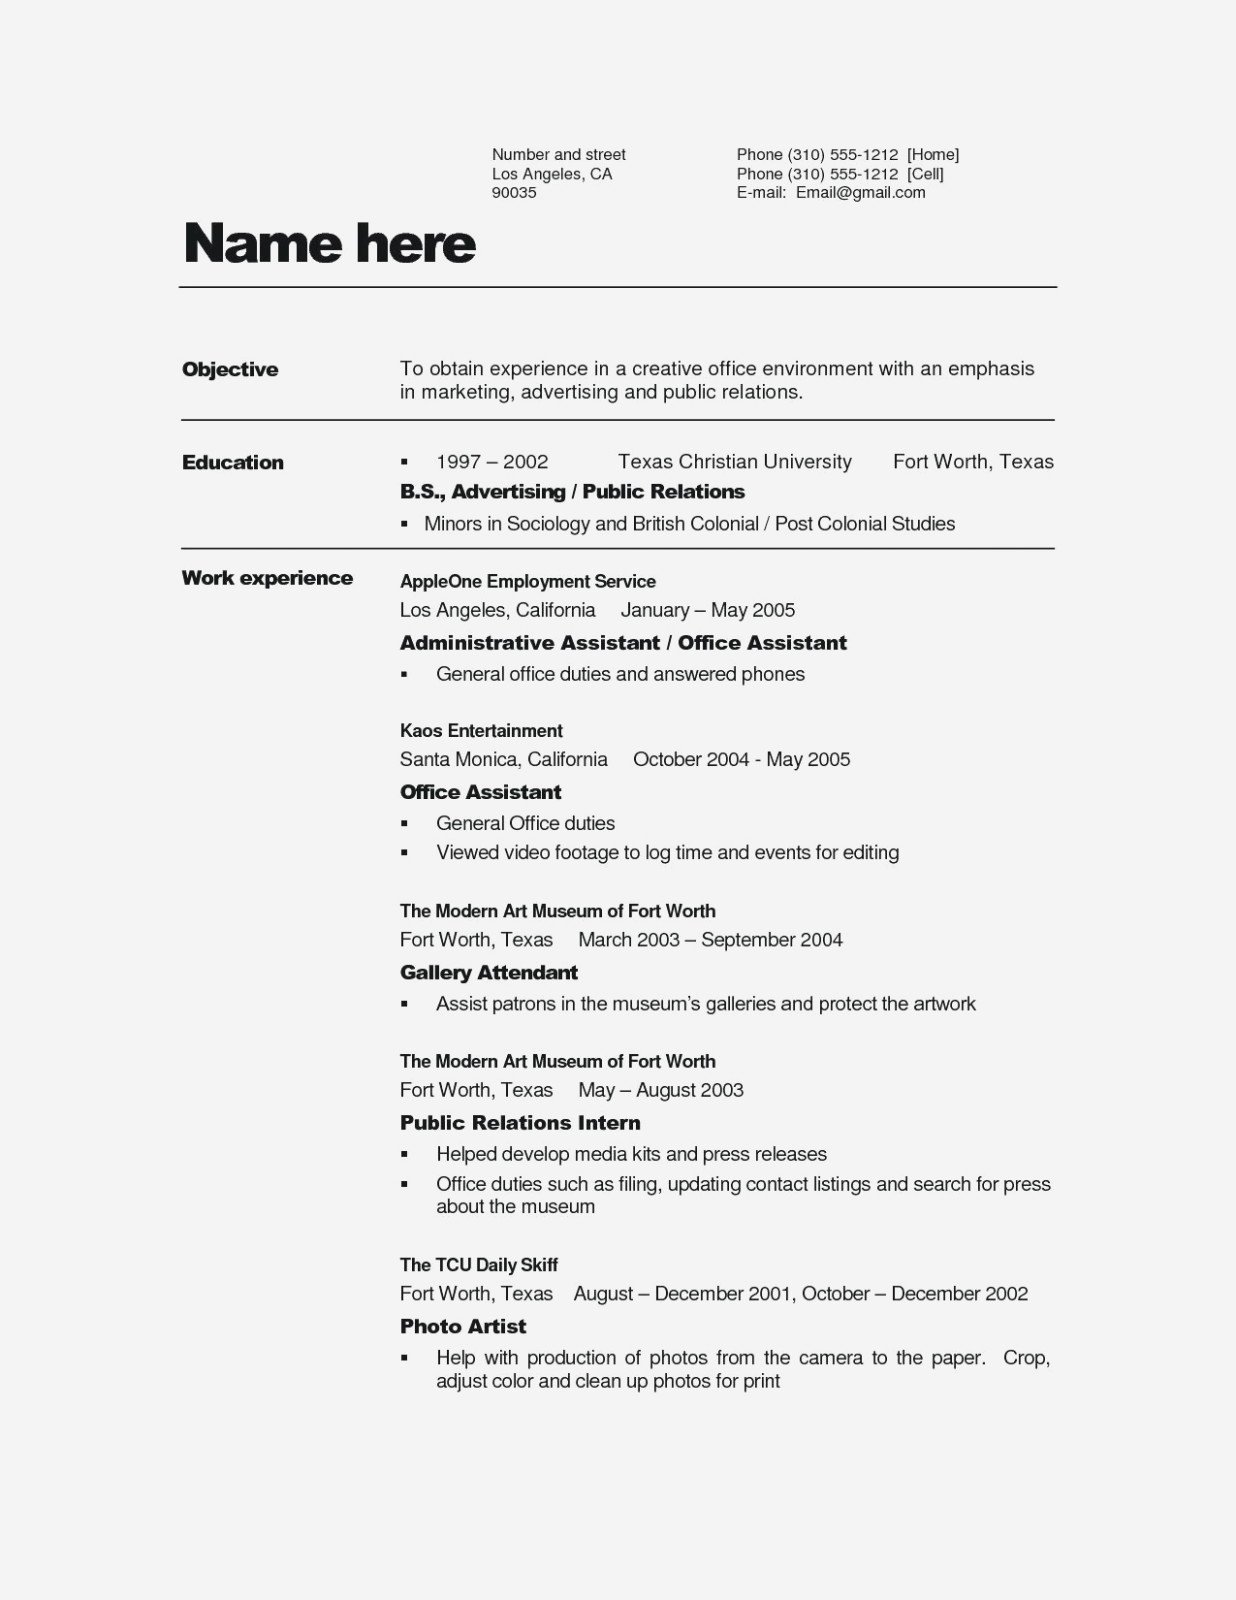 How Quick and Easy Resume Builder